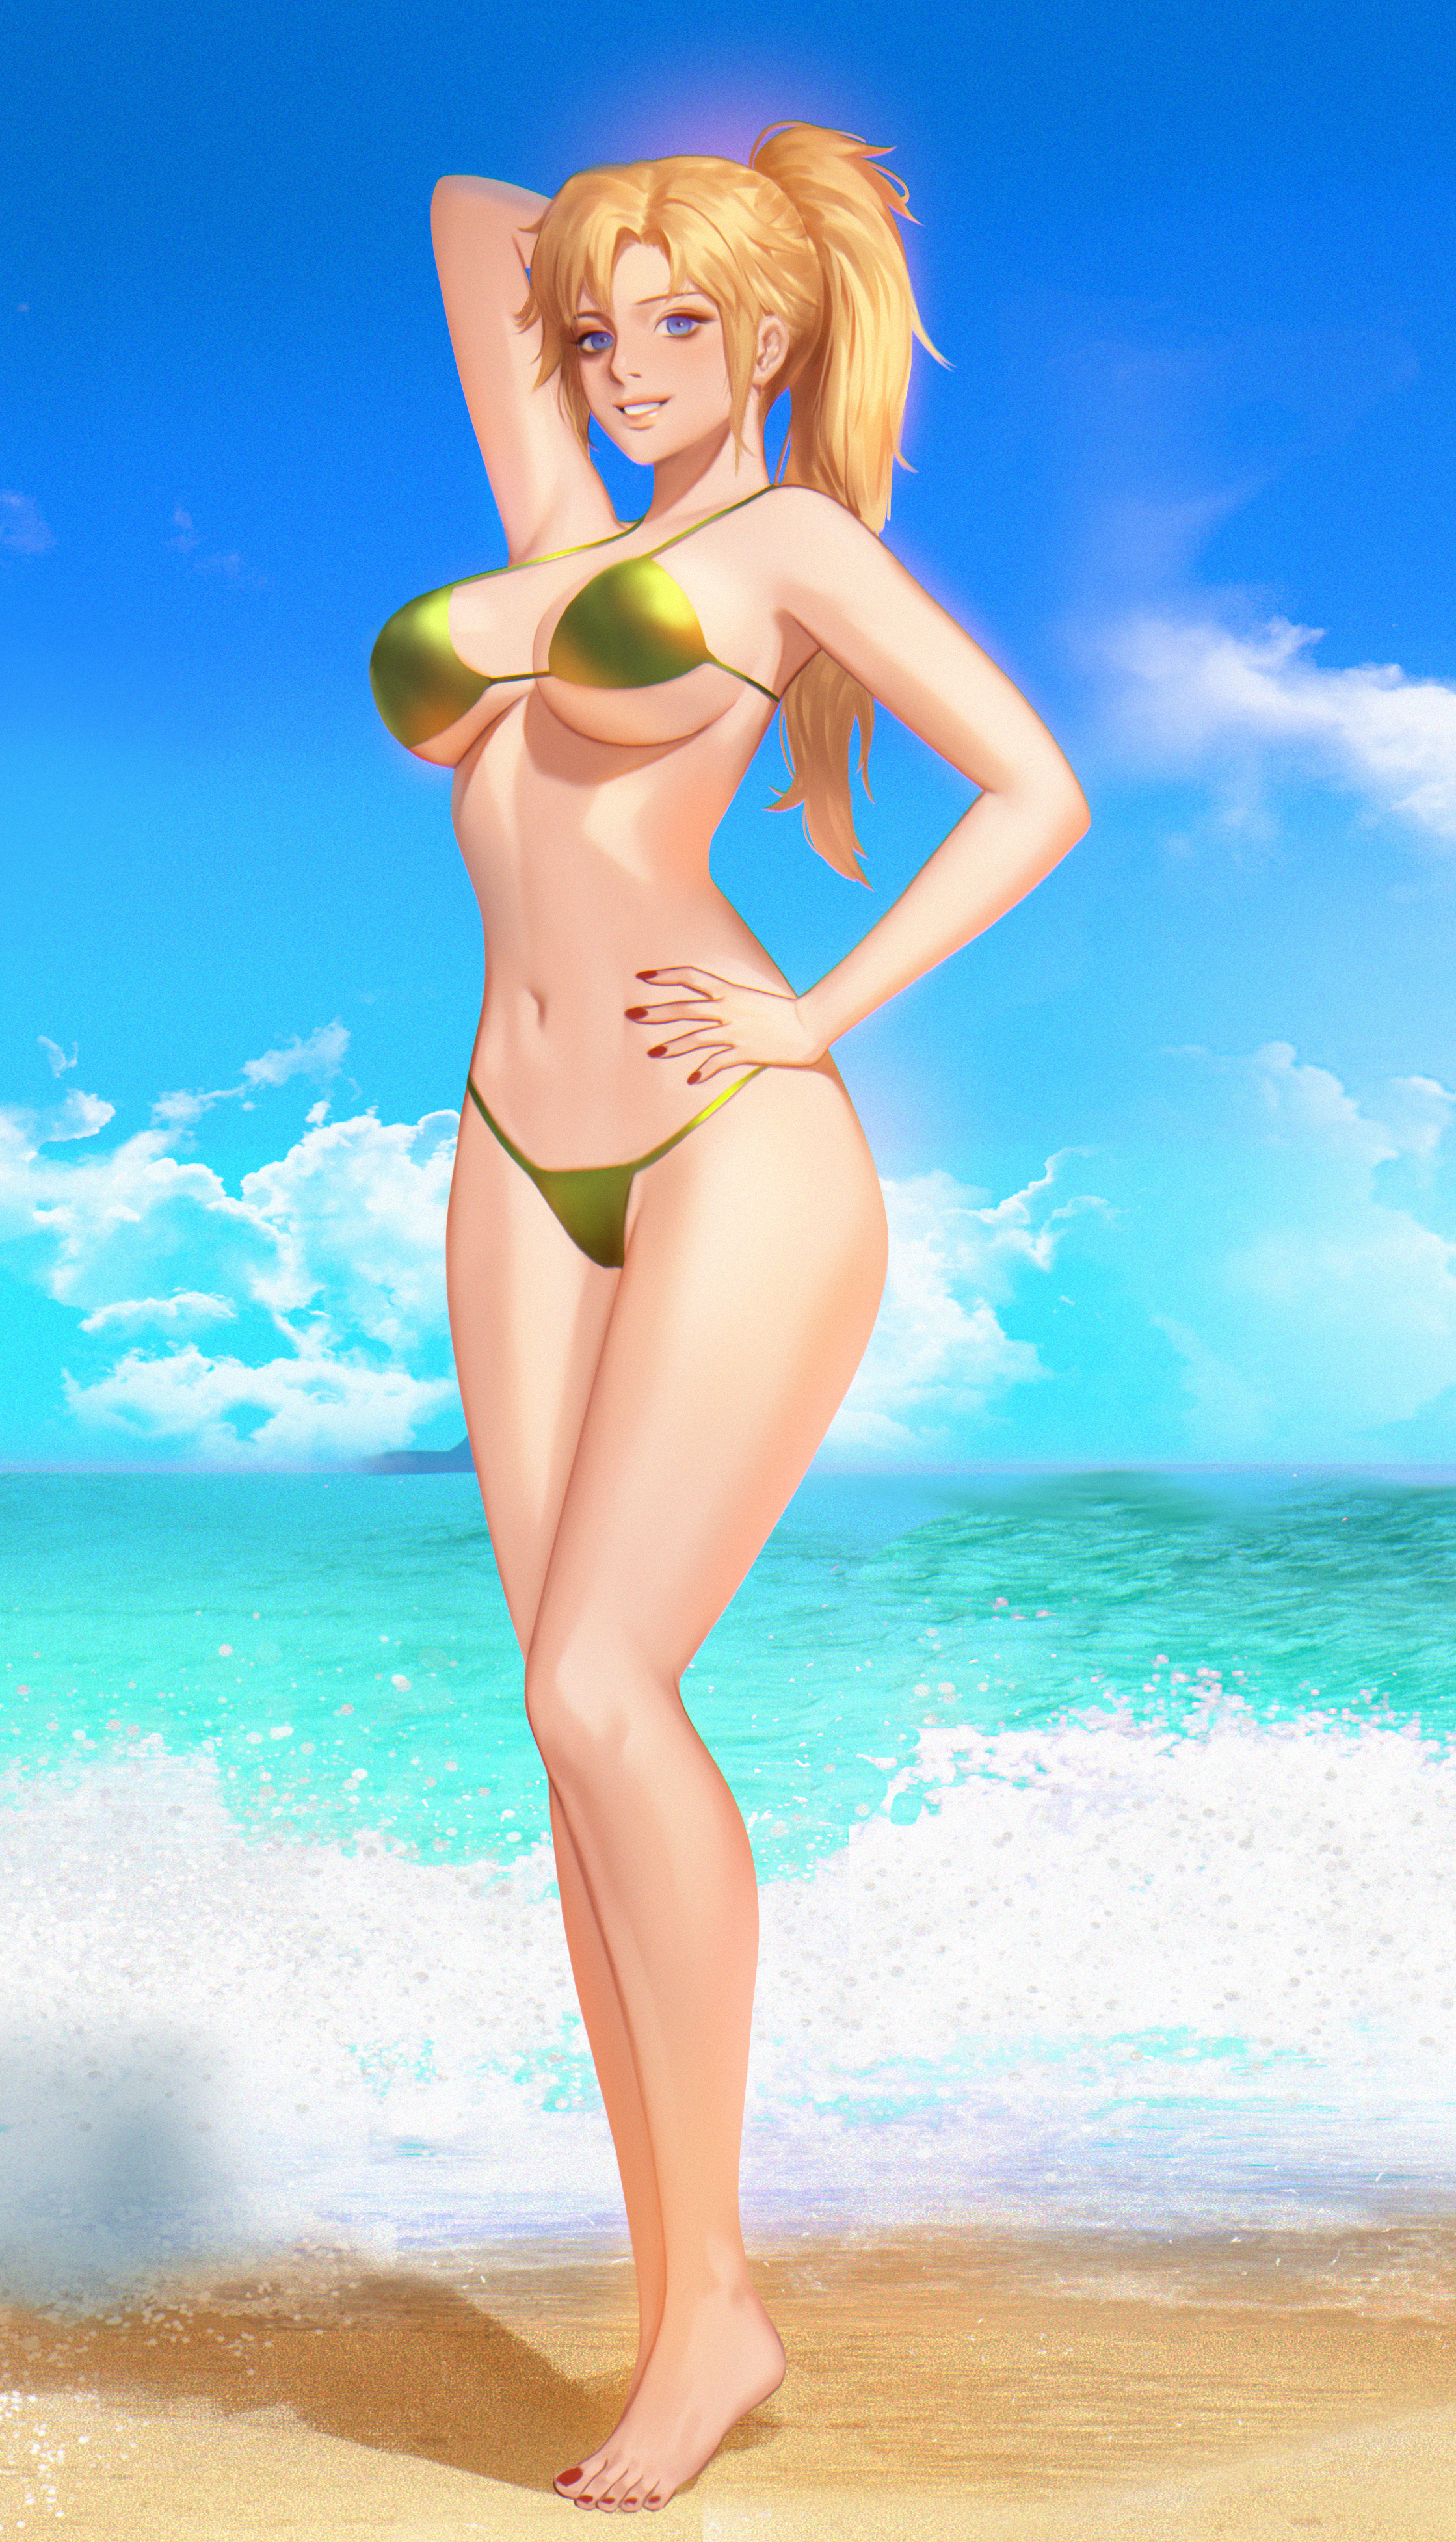 Anime 2239x3909 Mordred (Fate/Apocrypha) Fate/Grand Order anime anime girls blonde ponytail blue eyes looking at viewer smiling bikini swimwear underboob belly sea sky clouds painted nails artwork digital art drawing illustration 2D Seungyoon Lee fan art Pixiv